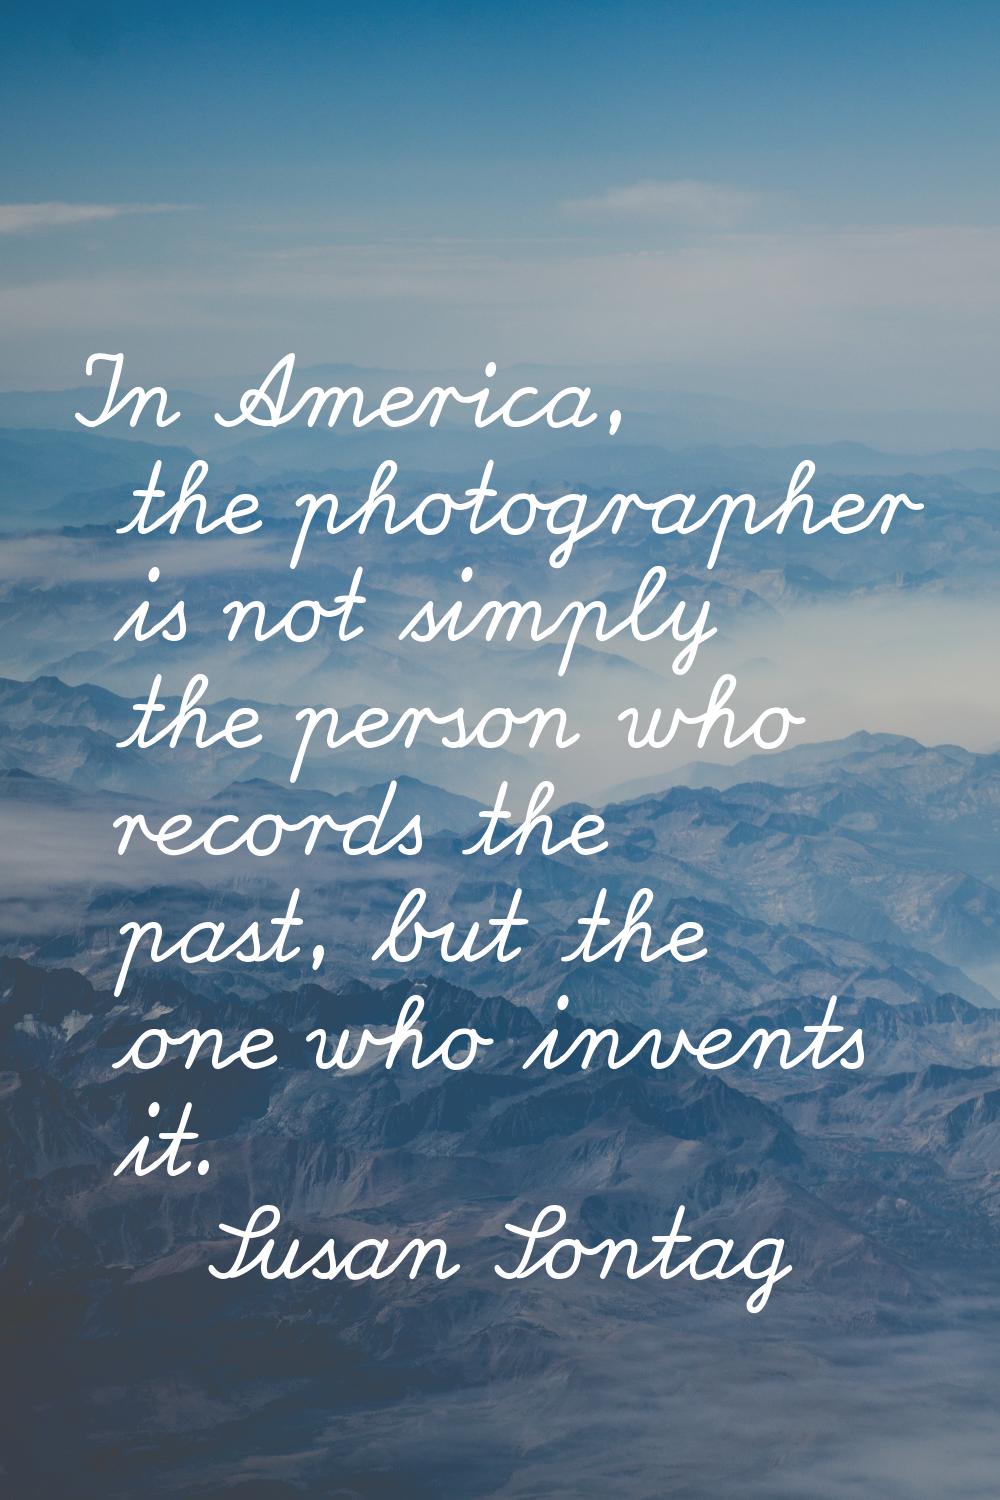 In America, the photographer is not simply the person who records the past, but the one who invents